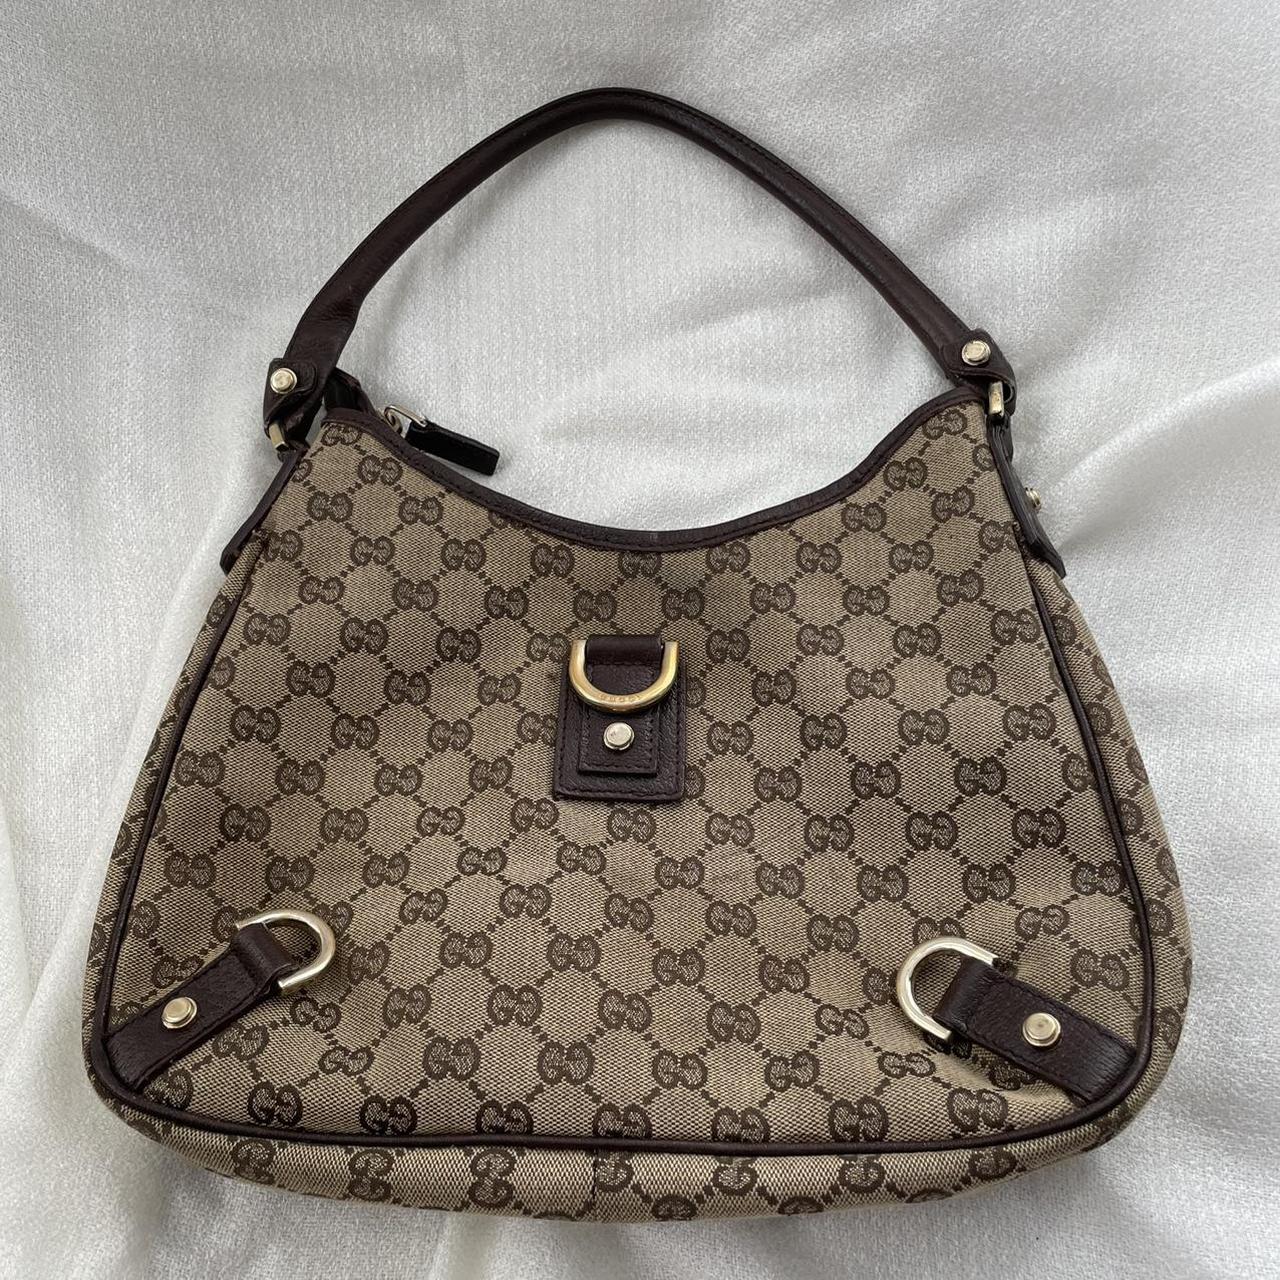 Gucci, Bags, Sold Authentic Vintage Gucci Dring Hobo Bag